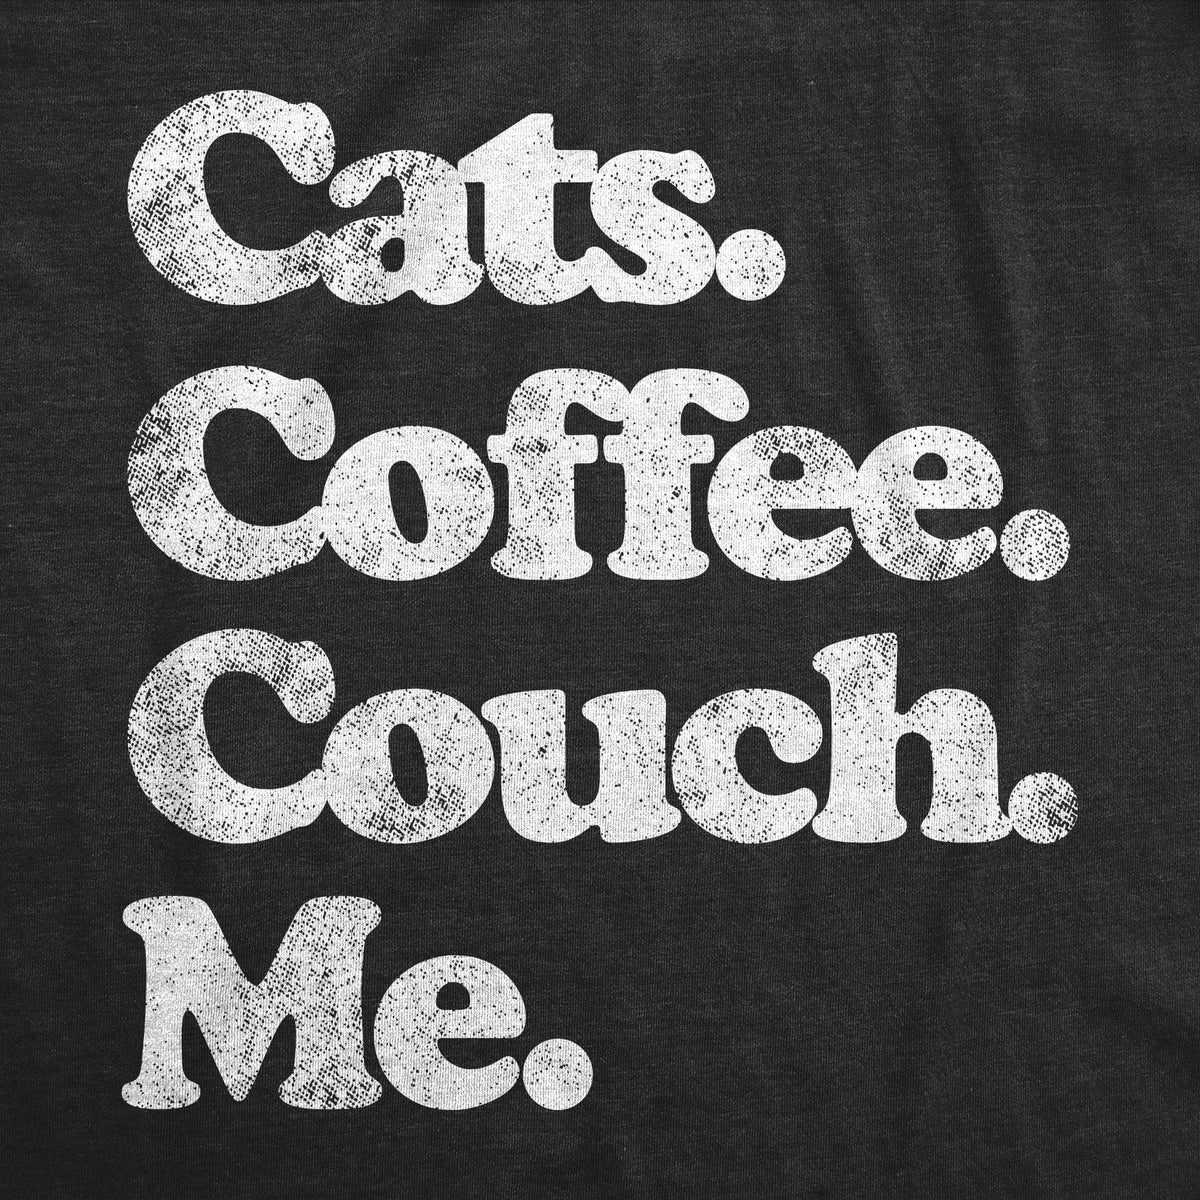 Cats Coffee Couch Me Women&#39;s Tshirt  -  Crazy Dog T-Shirts